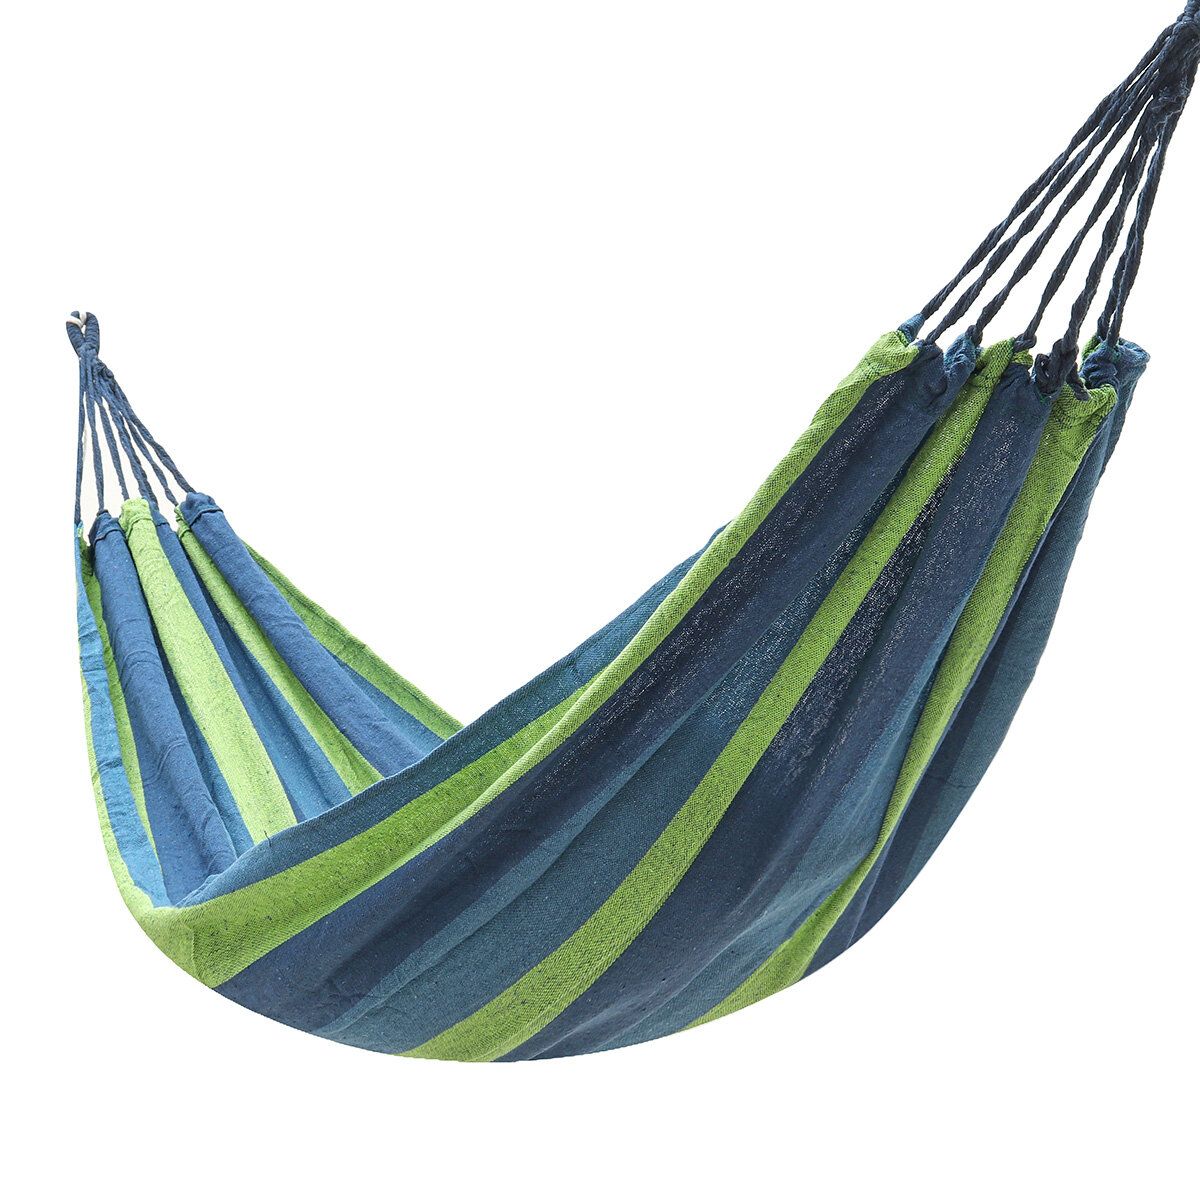 Single Person Hanging Hammock Garden Outdoor Camping Chair Swing Bed Hammock Bed